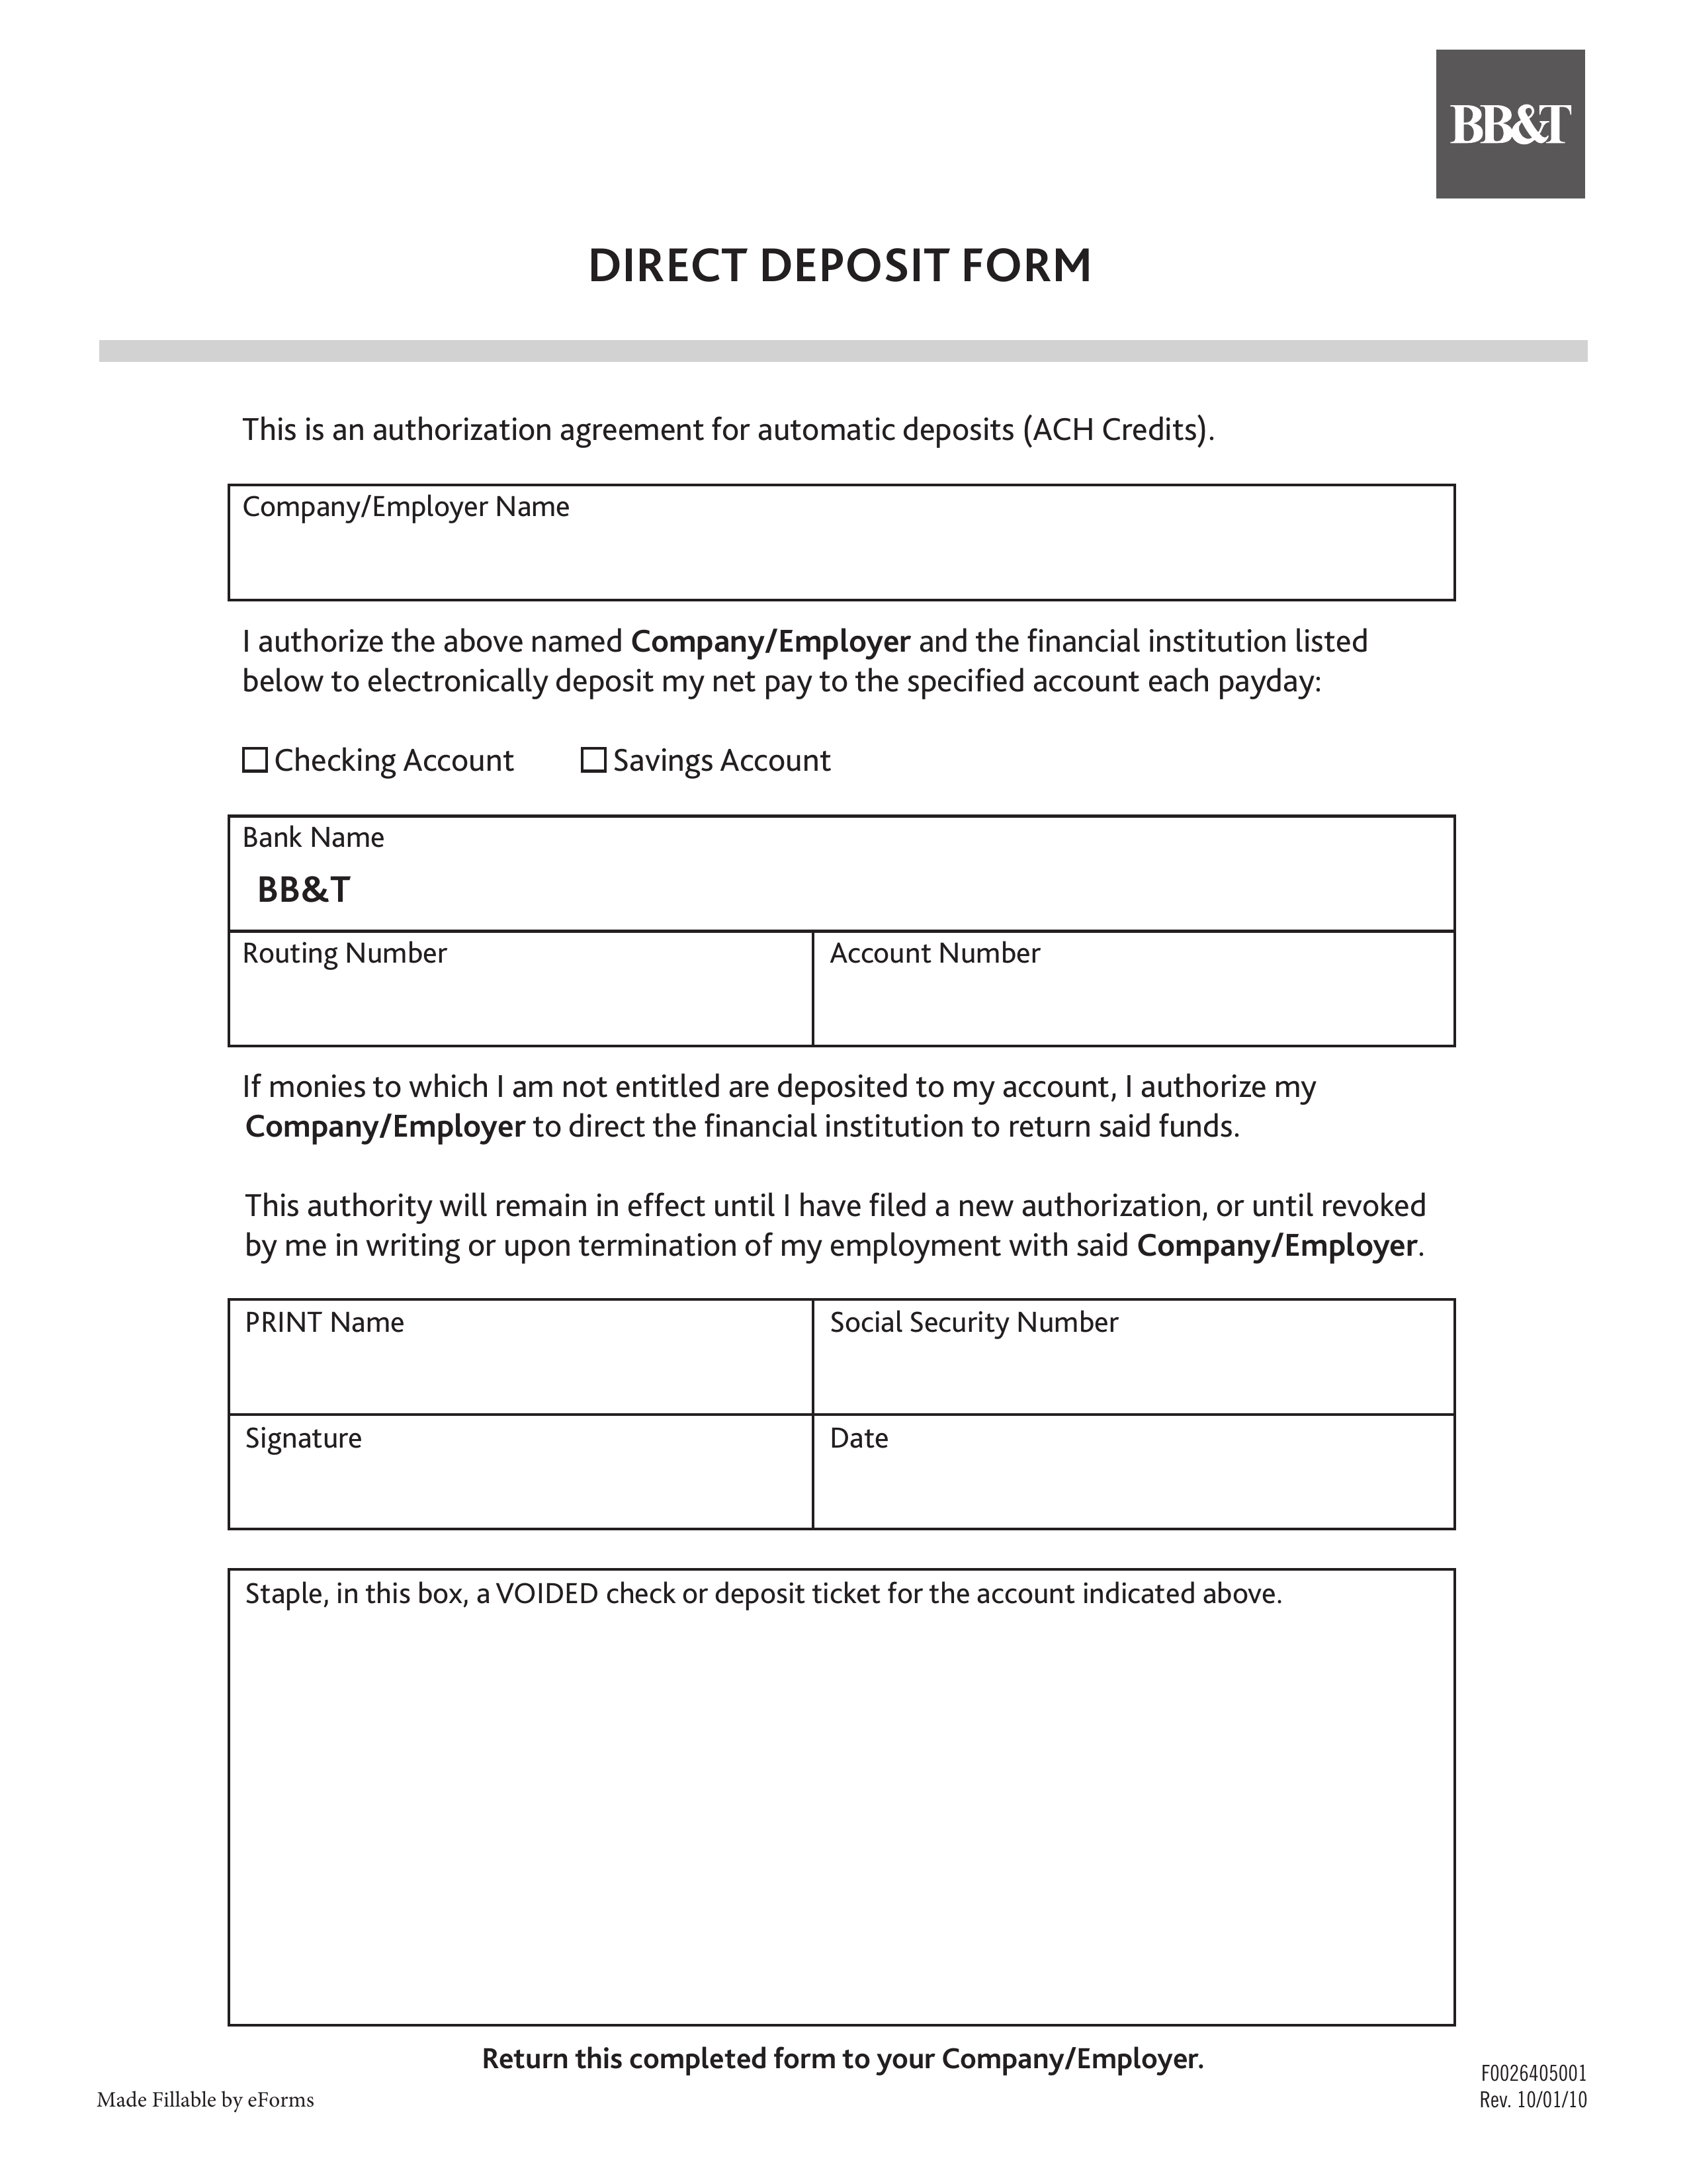 Direct Deposit Authorization Template from eforms.com